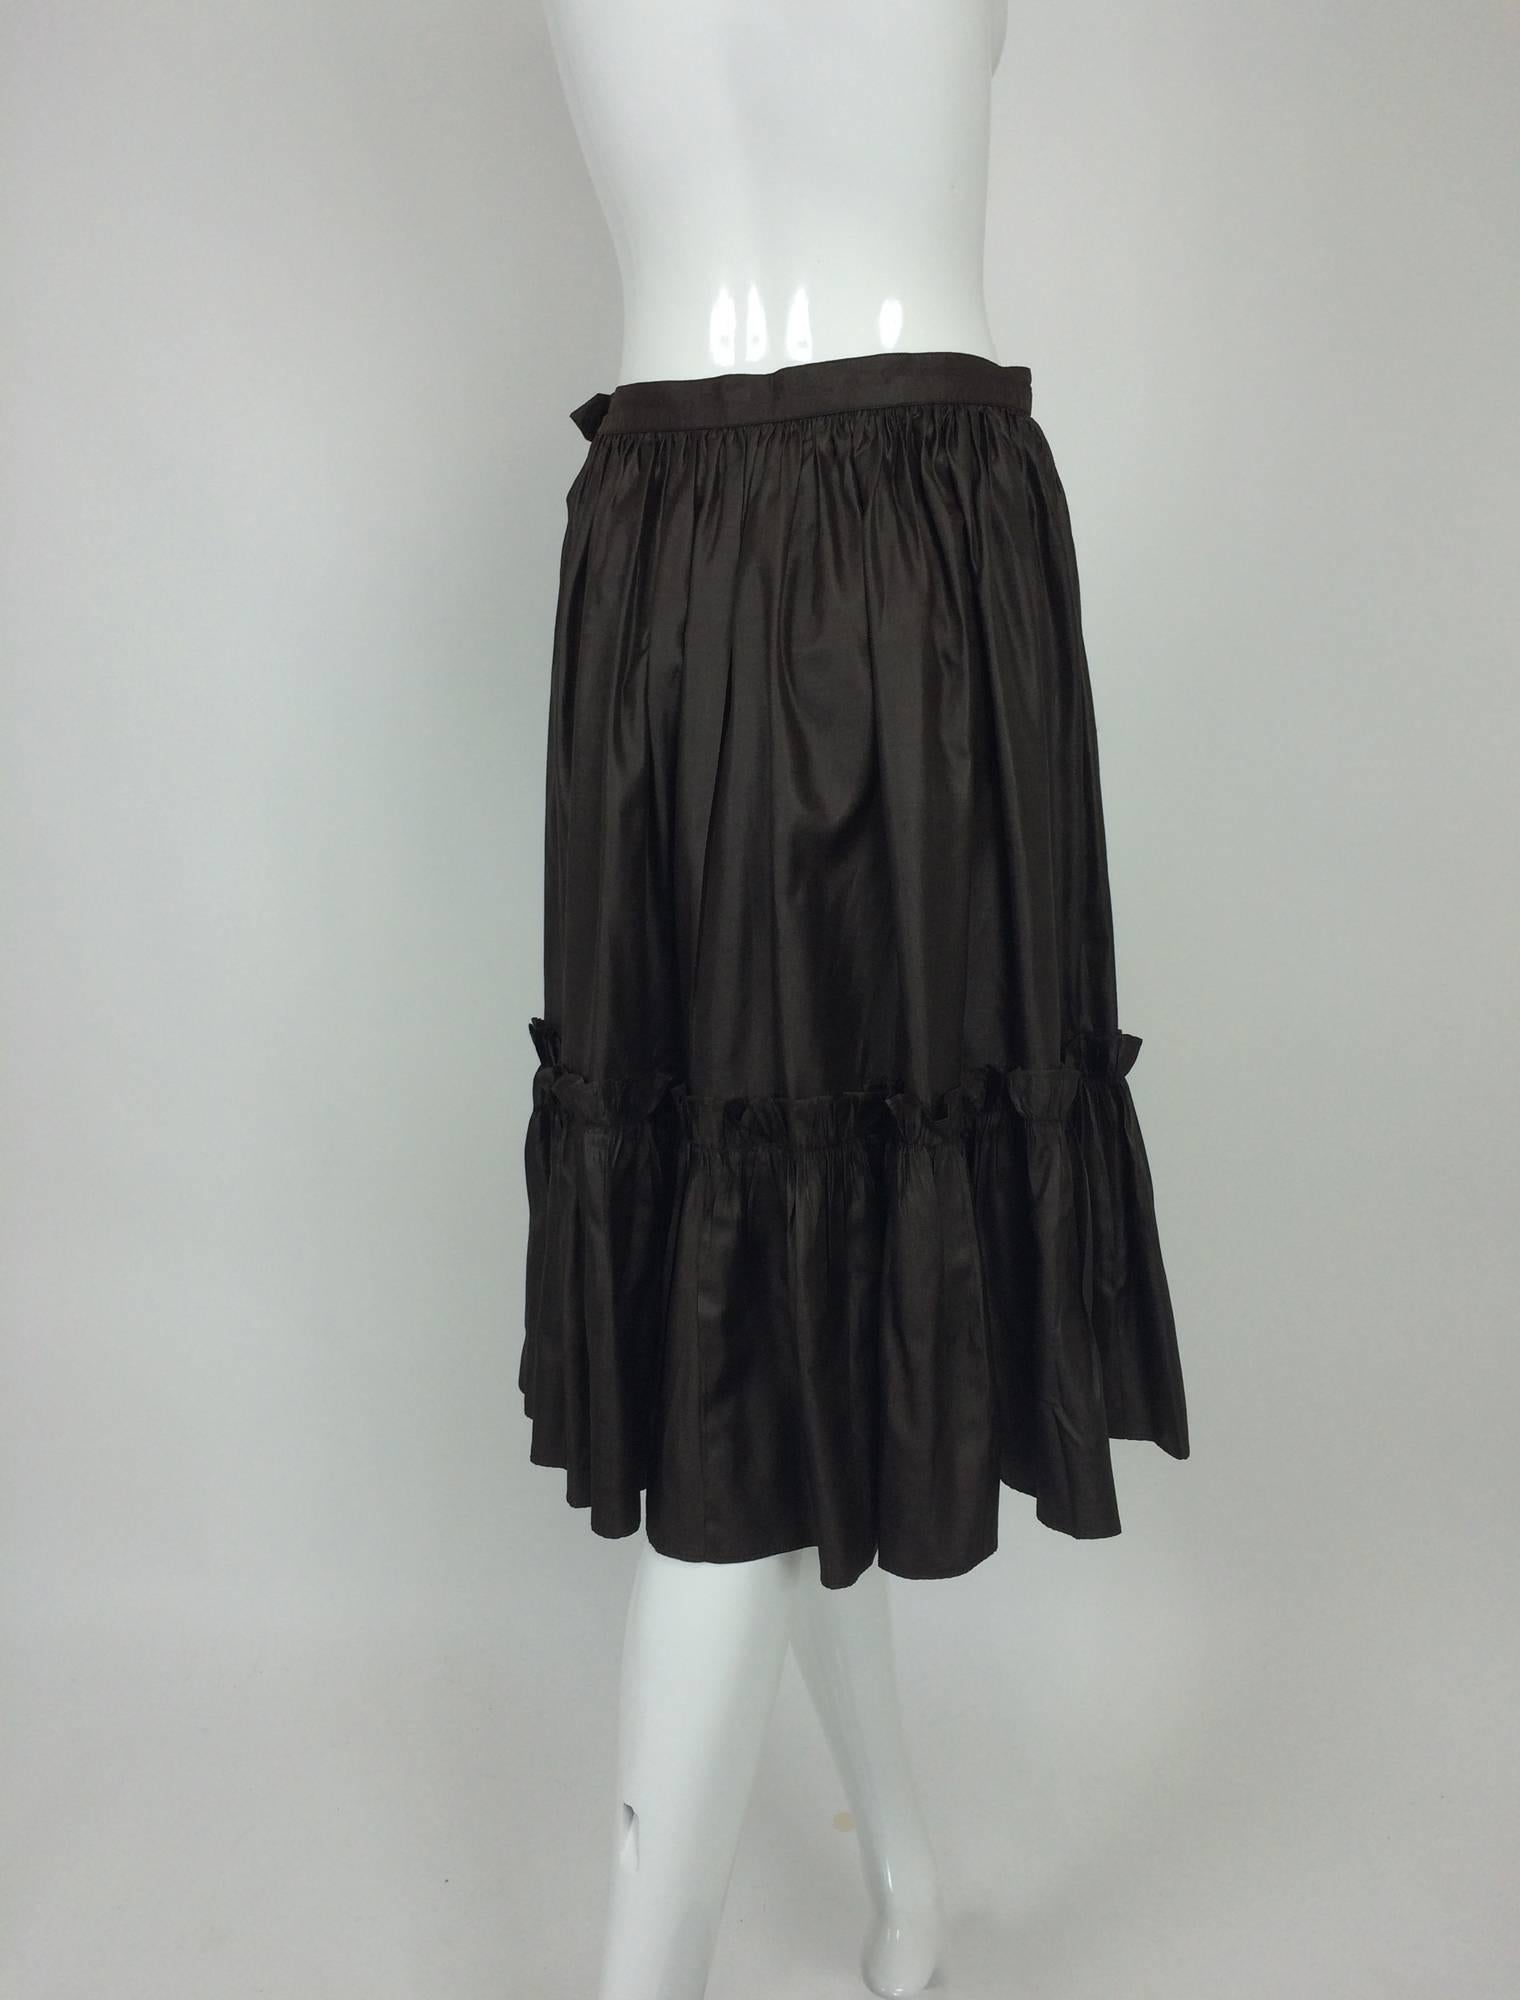 Yves St Laurent Rive gauche Chocolate Brown silk ruffle hem skirt 1970s...Fine silk ruffle hem skirt, banded waist with zipper closure...Barely if ever worn...Fits like a size small.

In excellent wearable condition... All our clothing is dry